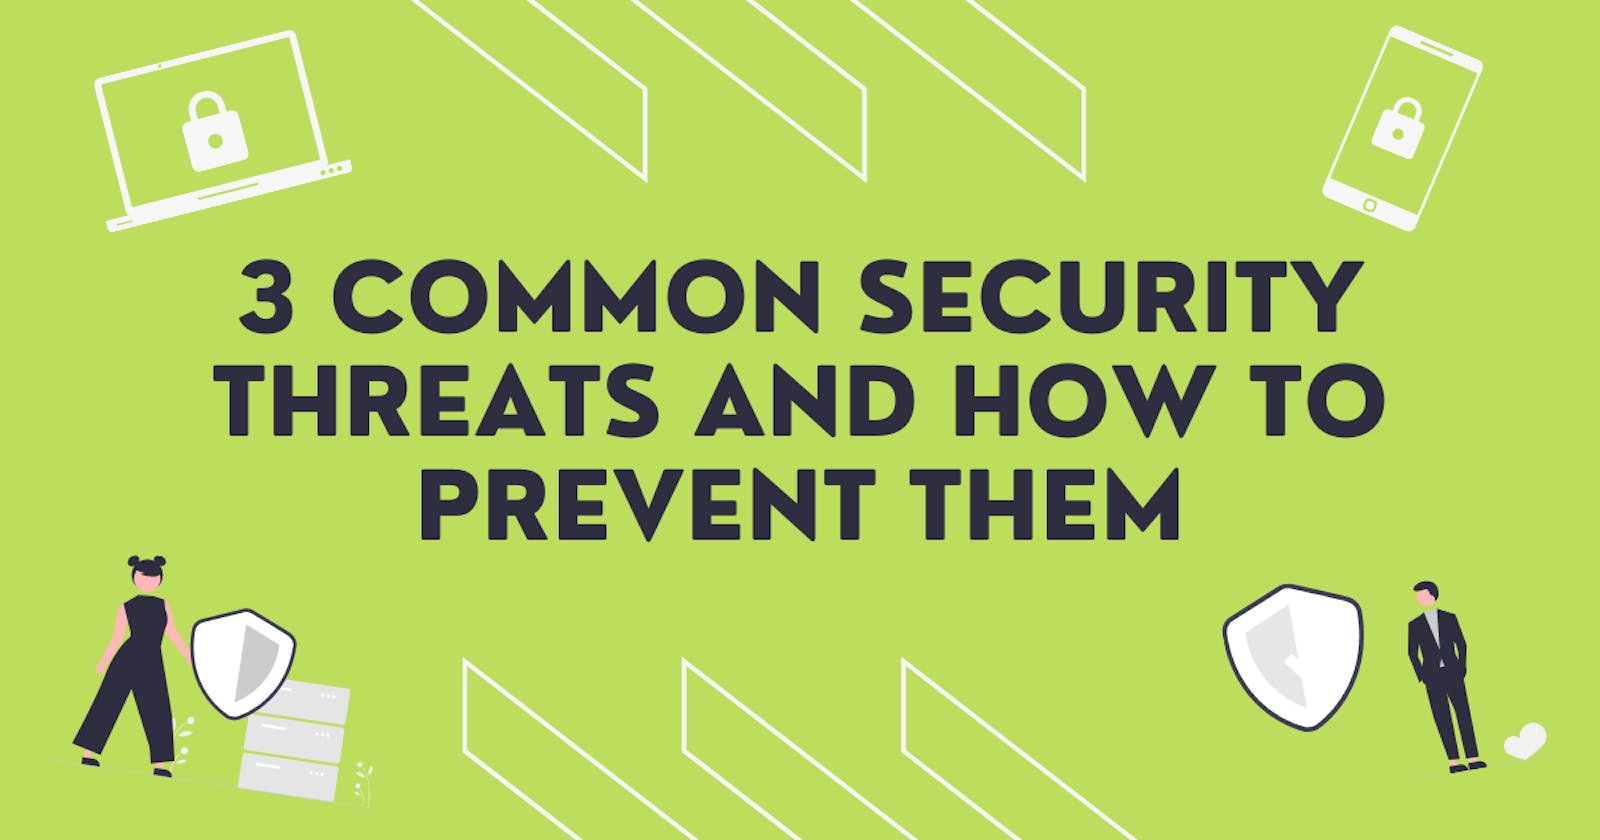 3 Common Security Threats and How to Prevent them.